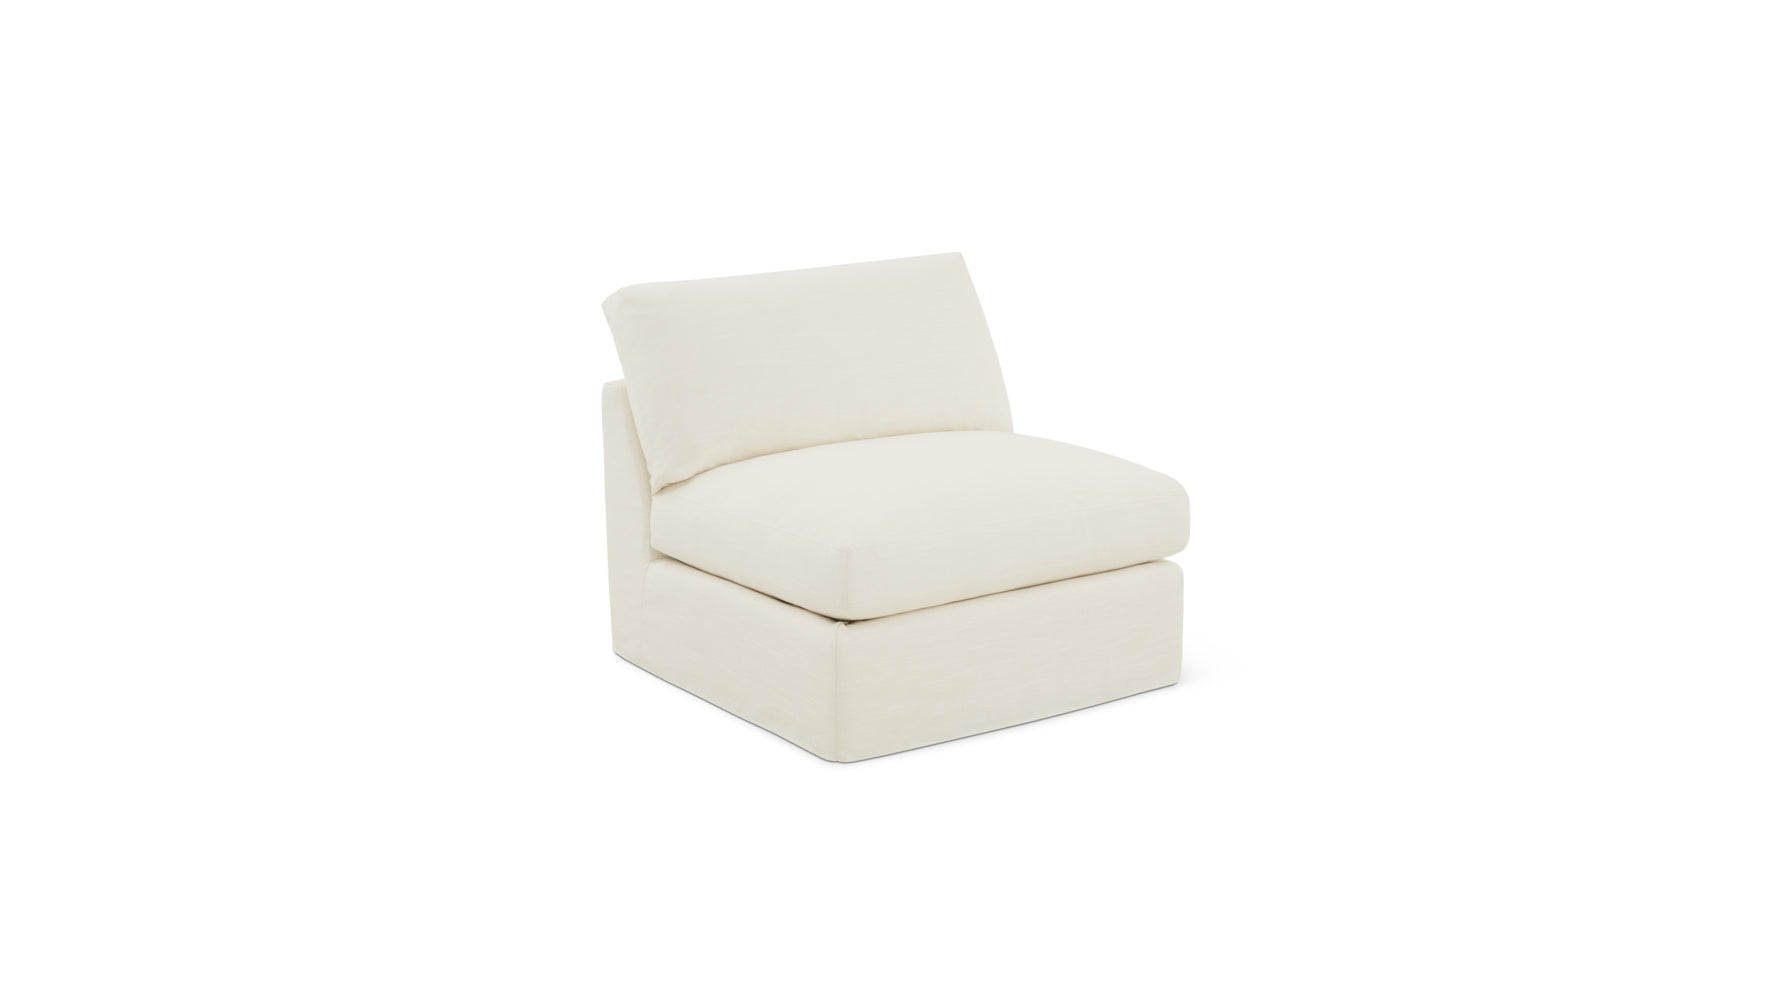 Get Together™ Armless Chair, Standard, Cream Linen - Image 6